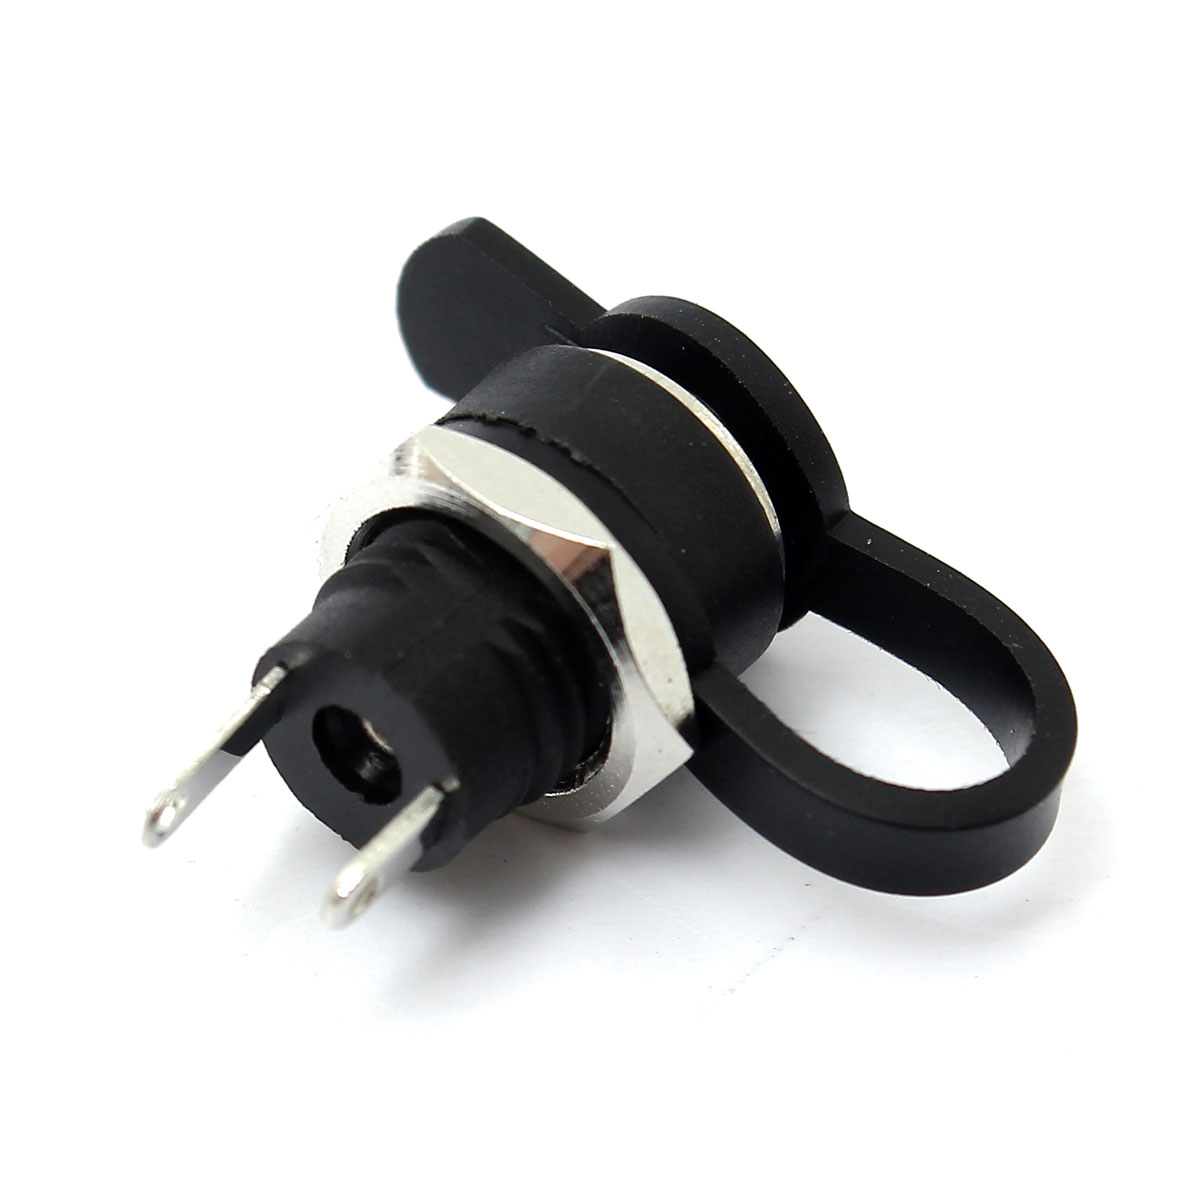 1PC-Waterproof-3A-55x25mm-DC-Socket-Jack-Power-Charger-Plug-Panel-Mount-Connector-1398437